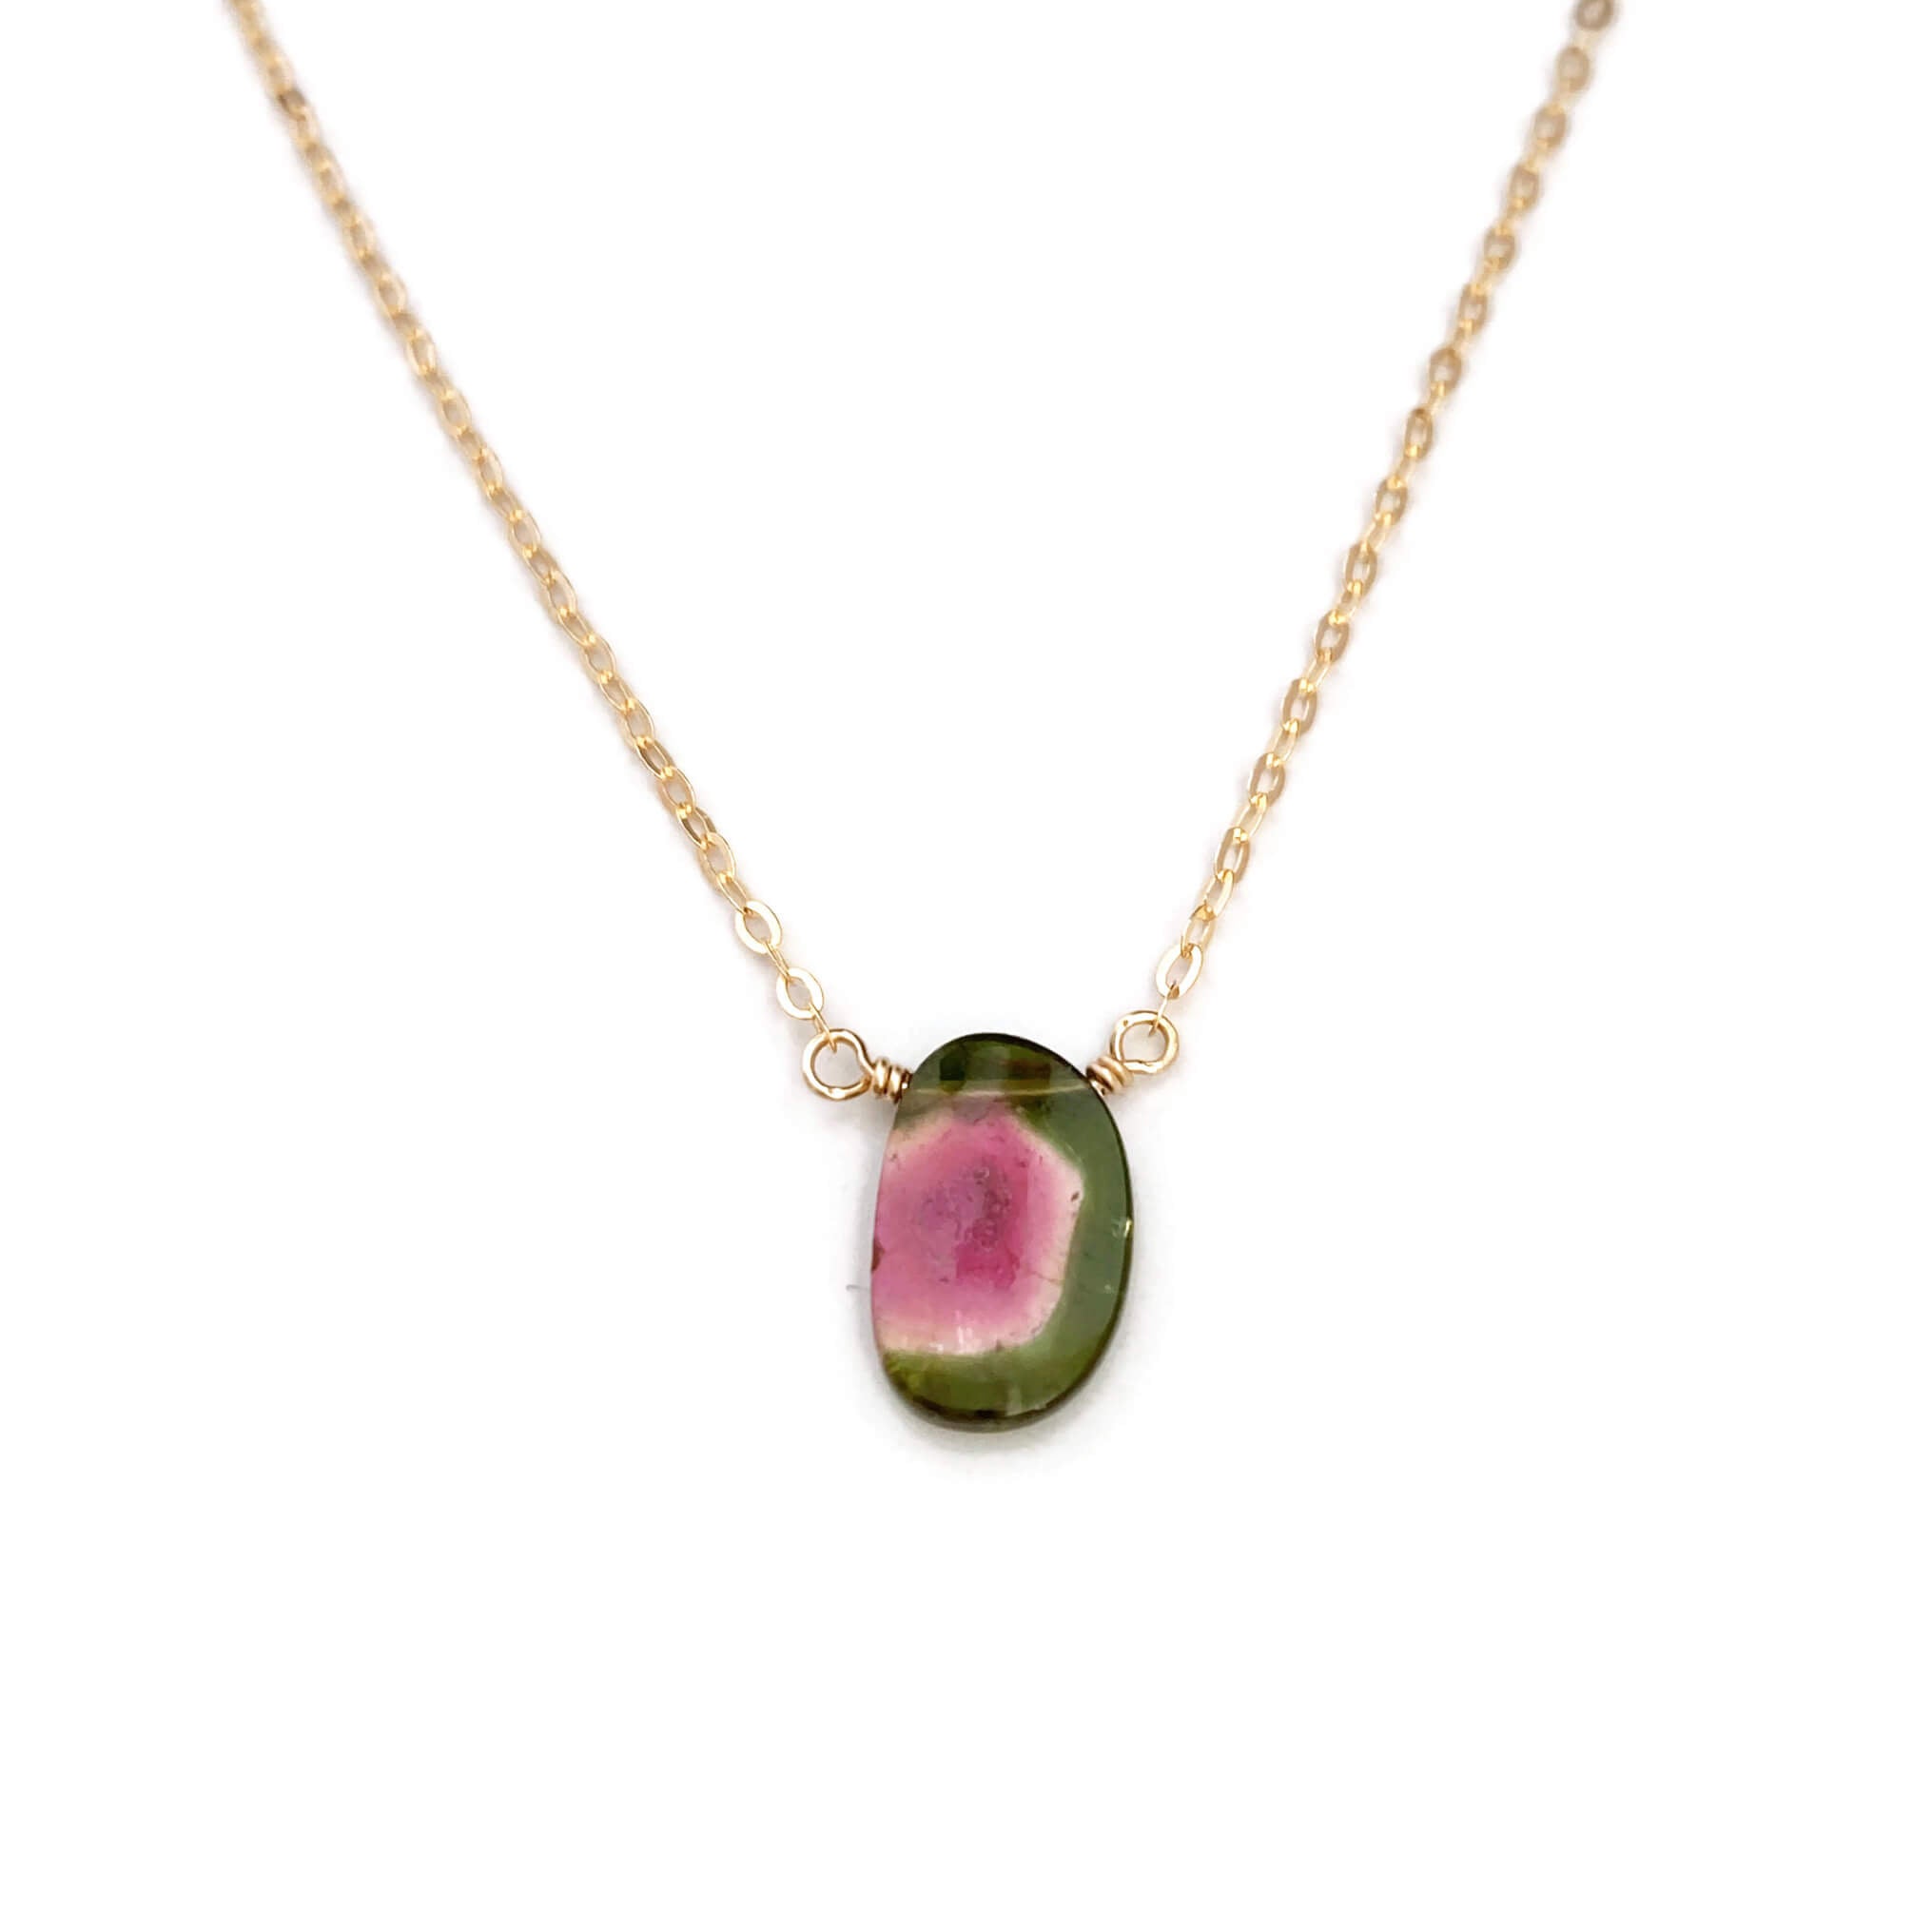 This watermelon tourmaline slice necklace is handmade in our San Francisco studio with careful craftsmanship. Perfect for that casual fun look, the chain for this necklace can be made in several different materials. 